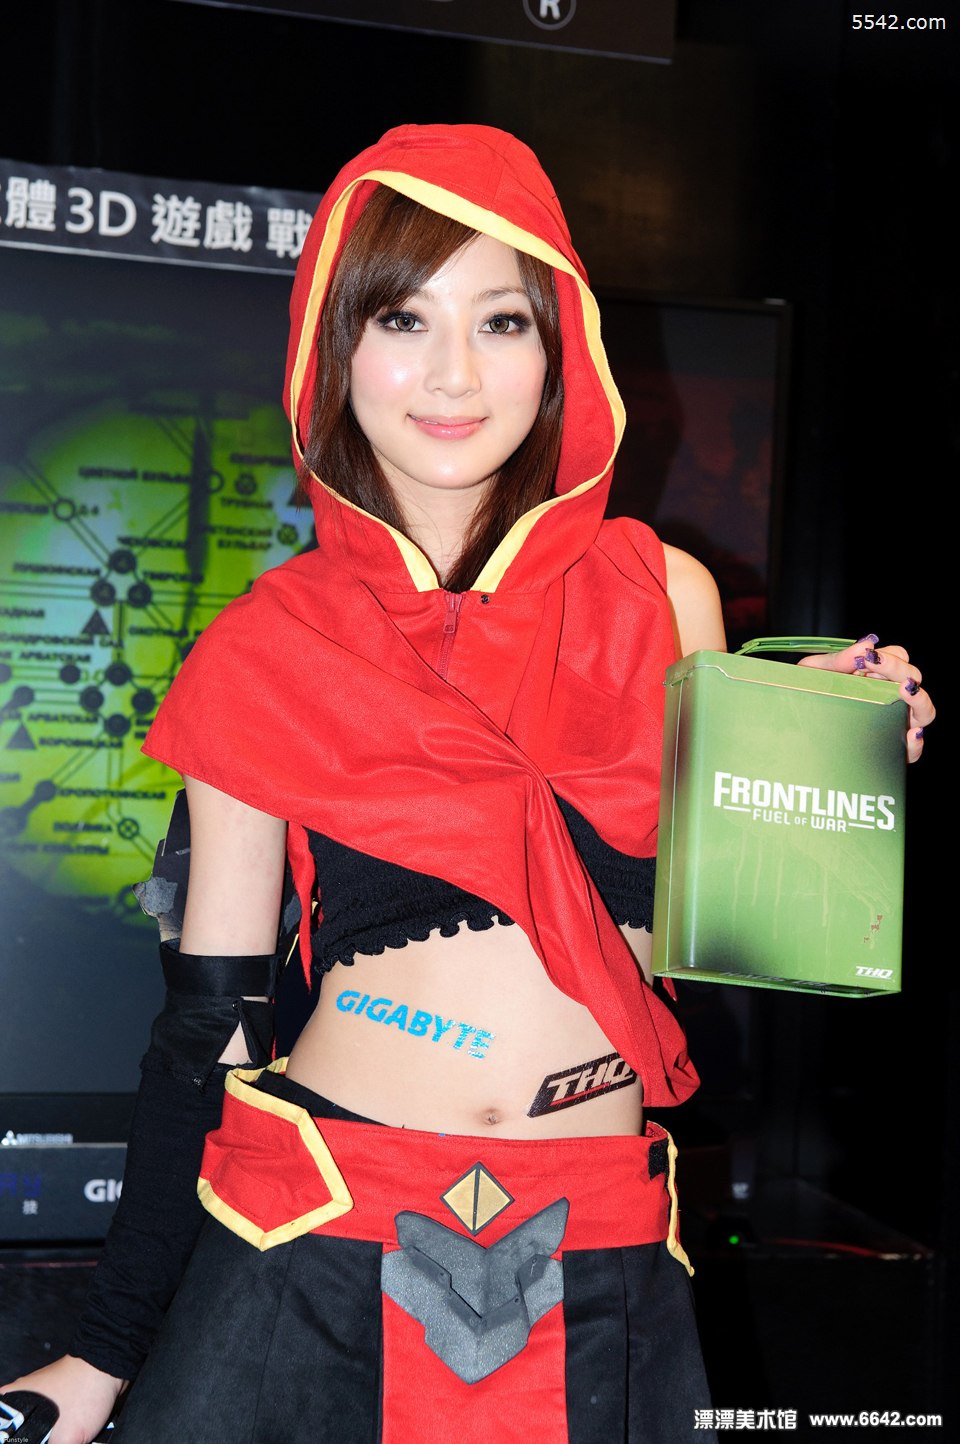 Sexy Gigabyte asian Pretty from Taipei Game Contest